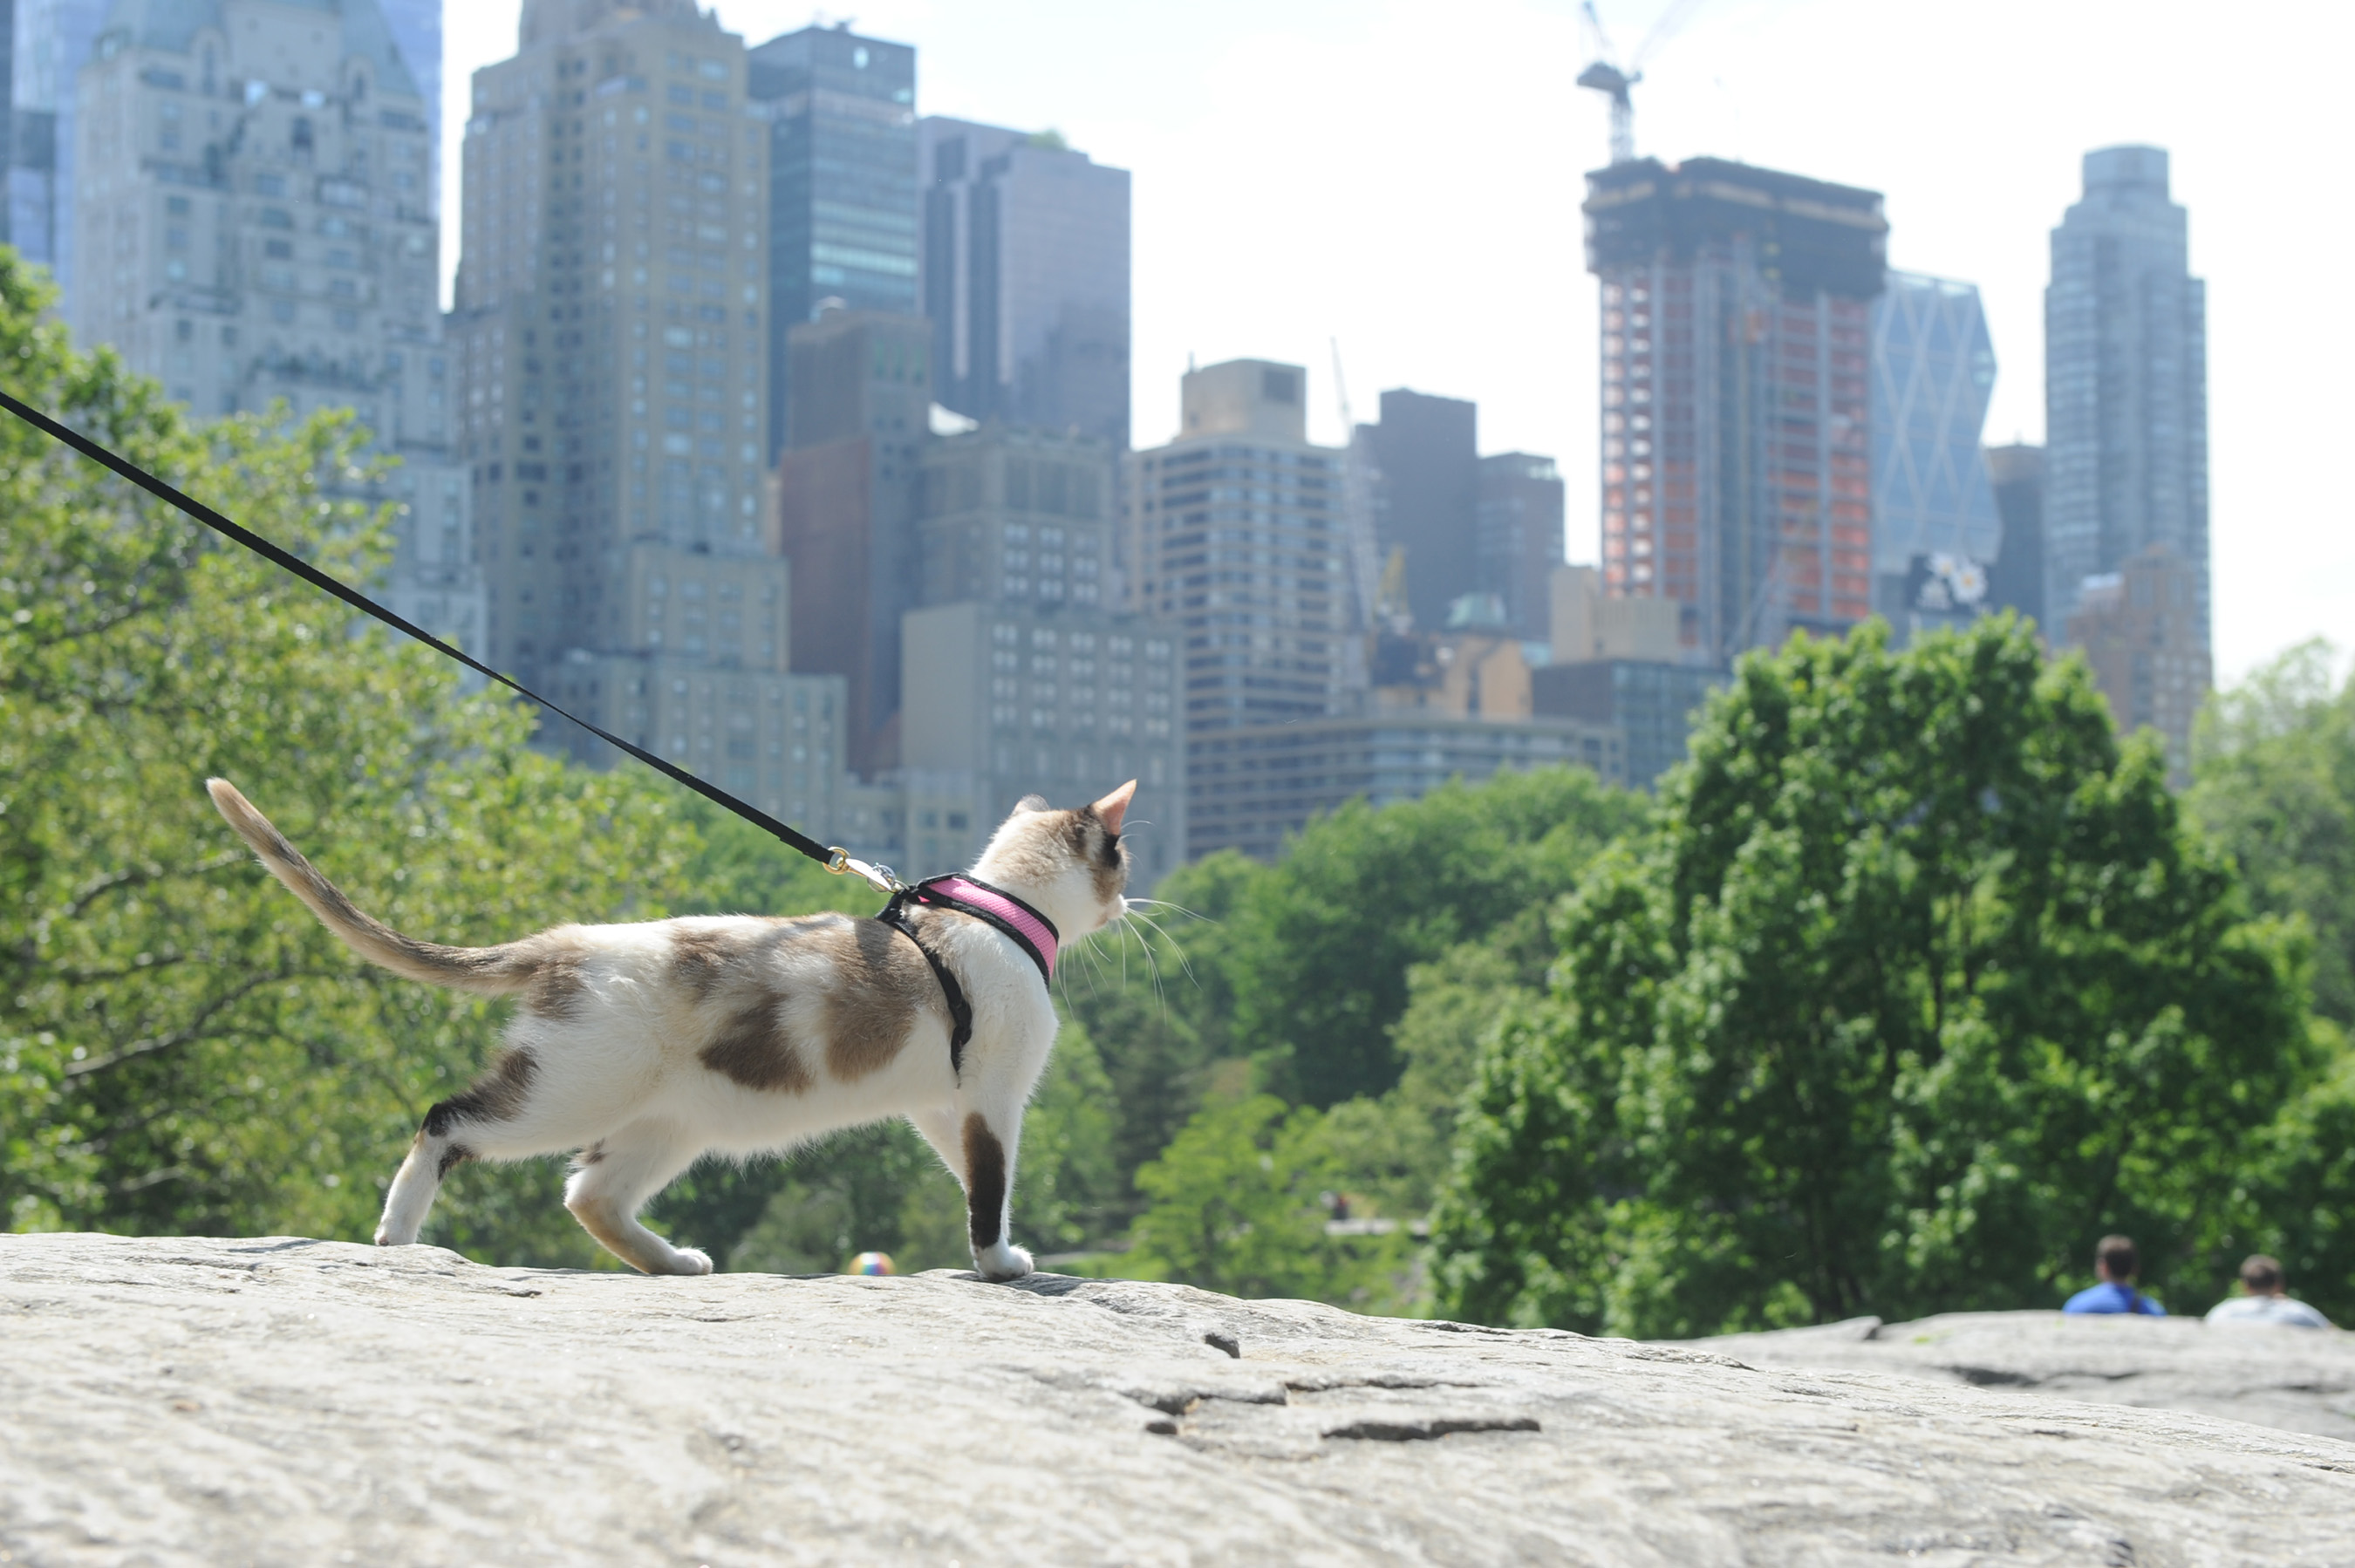 Gaia displays her true nature with Purina Pro Plan in New York’s Central Park to celebrate National “Take Your Cat On An Adventure” Day on June 15. (Diane Bondareff/AP Images for Purina Pro Plan)